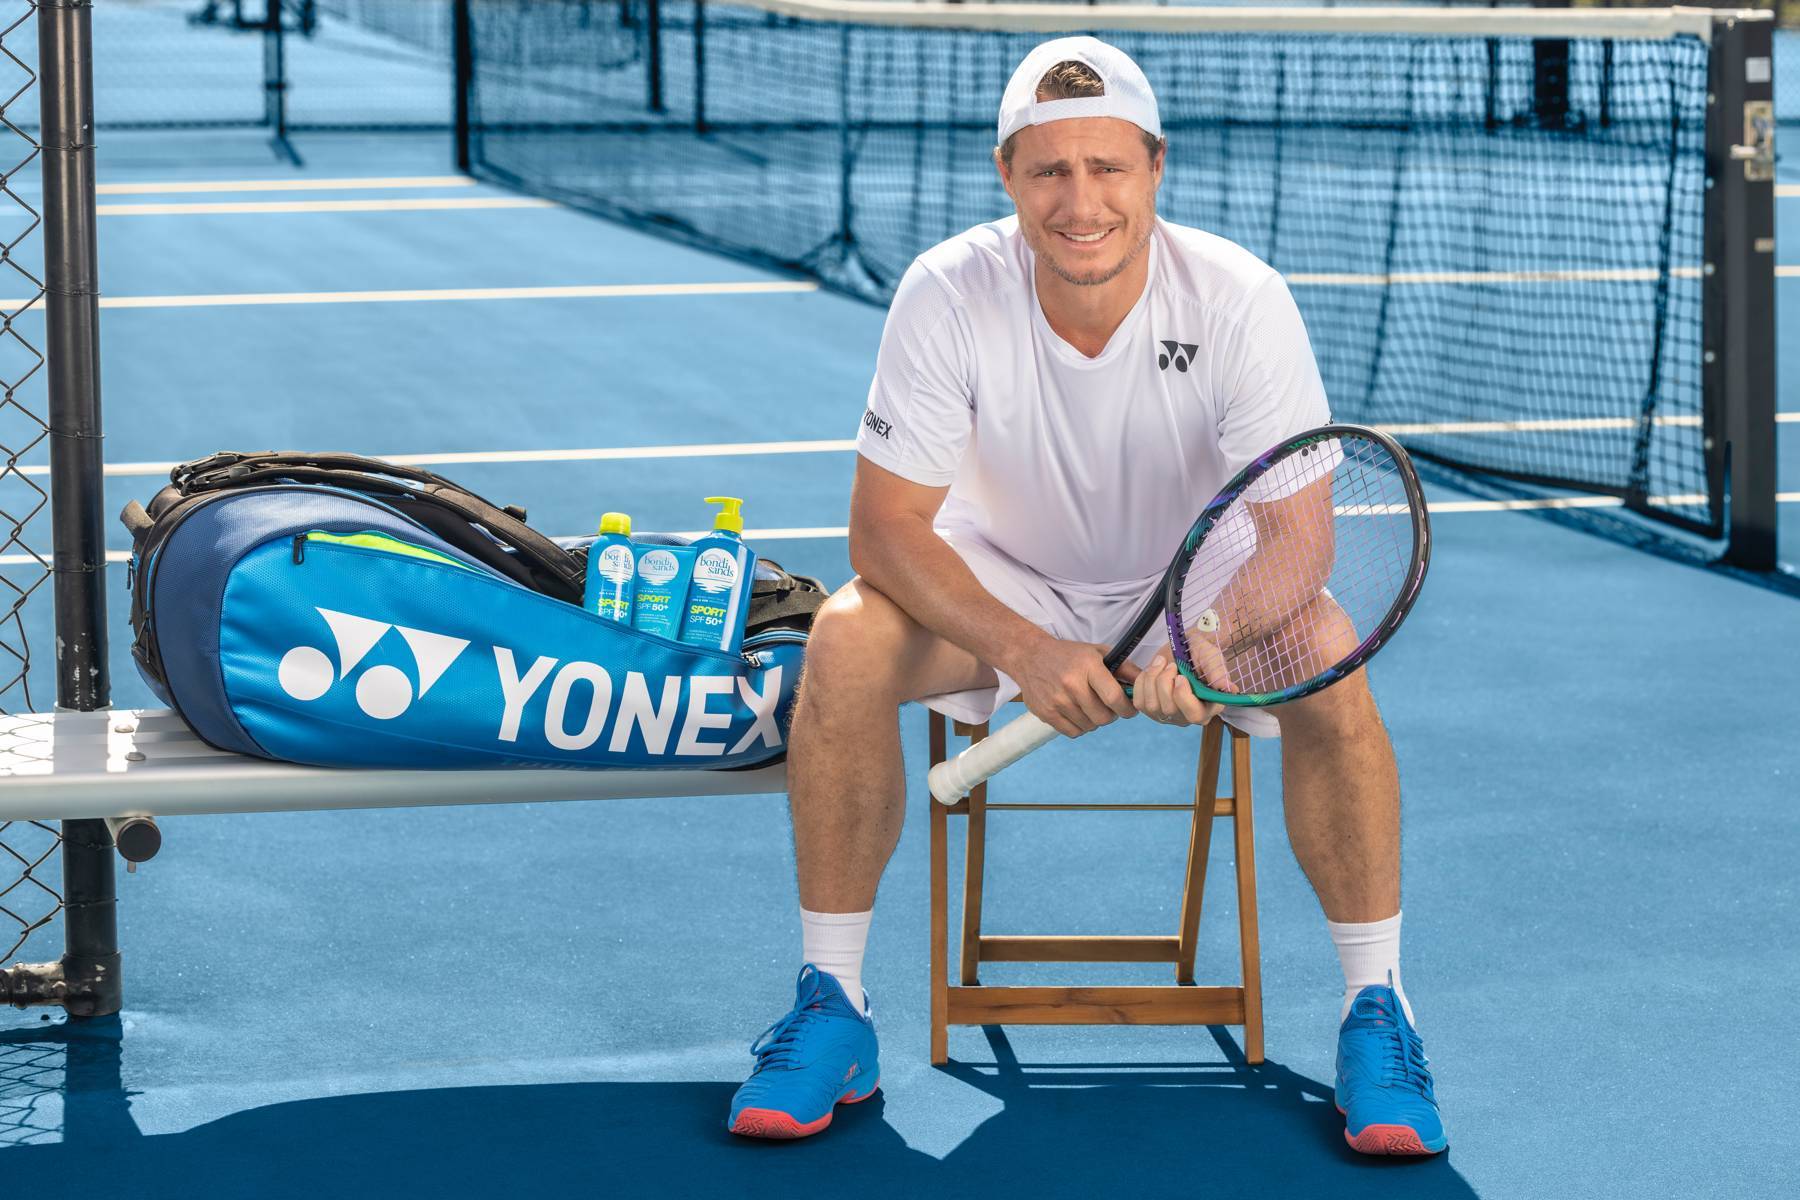 Game, Set, Protect With Bondi Sands At The Australian Open